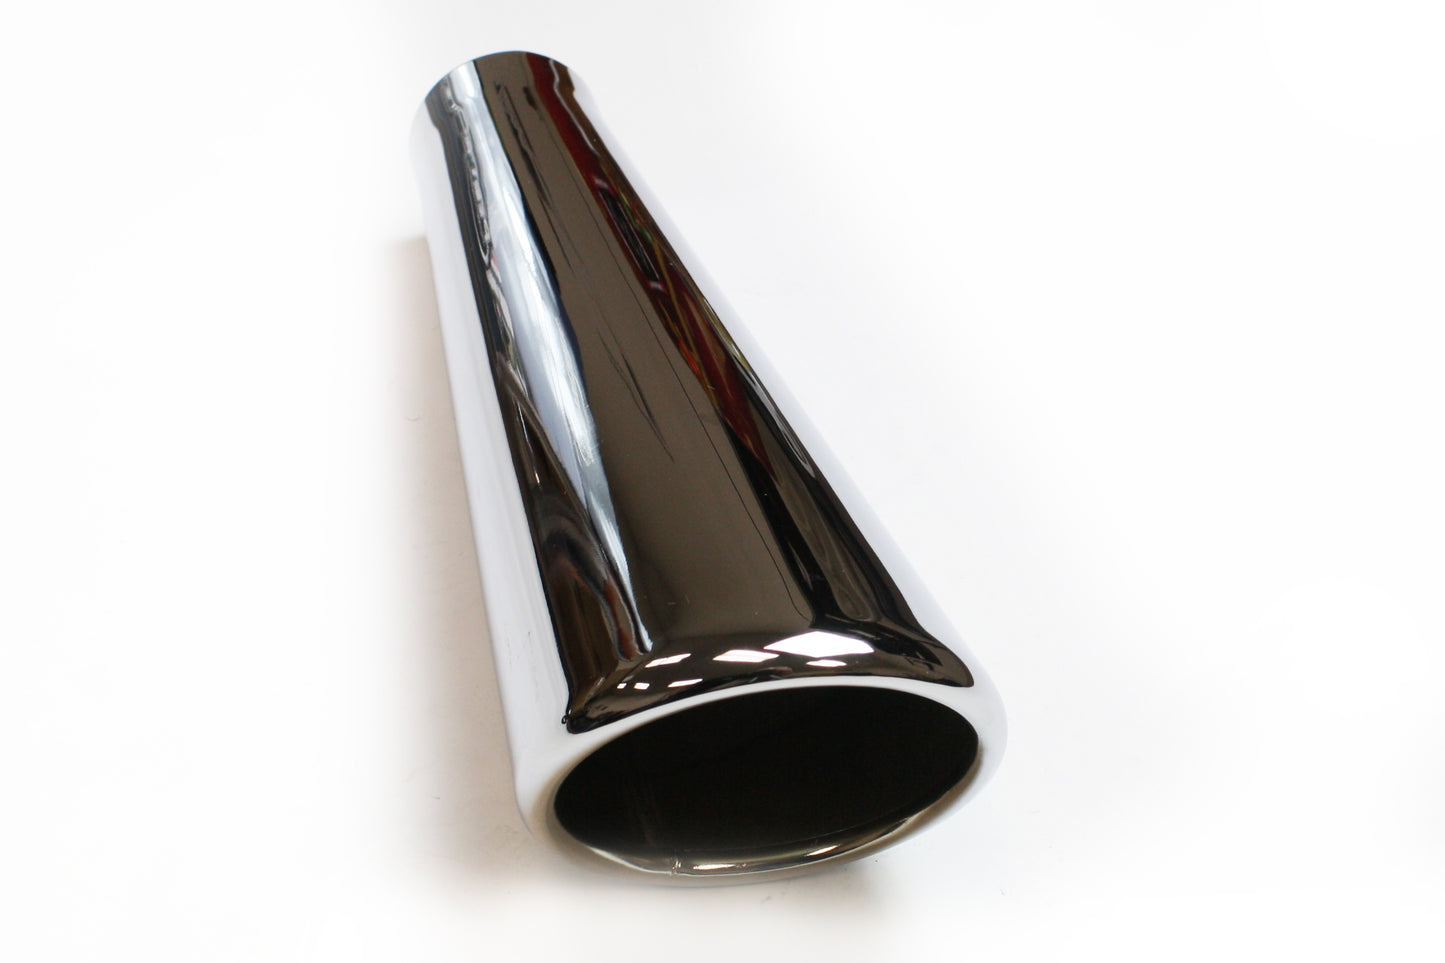 JBA Performance Exhaust  12-08211 2” x 4” x 11” Rolled S/S Angle Cut Chrome Trumpet Tip - Weld on